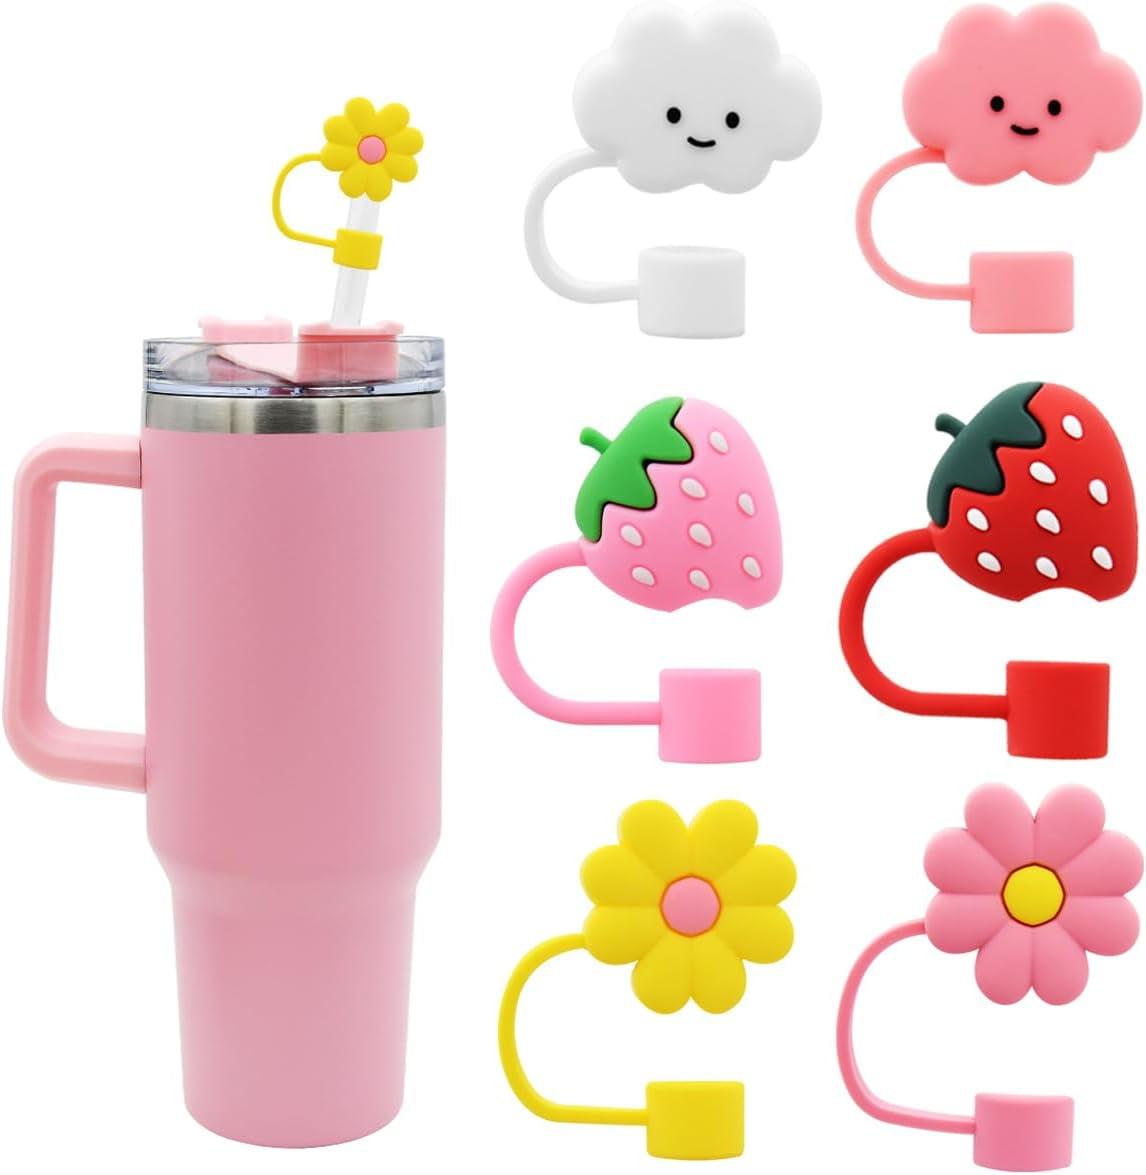 6Pcs Straw Cover Cap for Stanley Cup, 10mm Cute Flower Cloud Shape